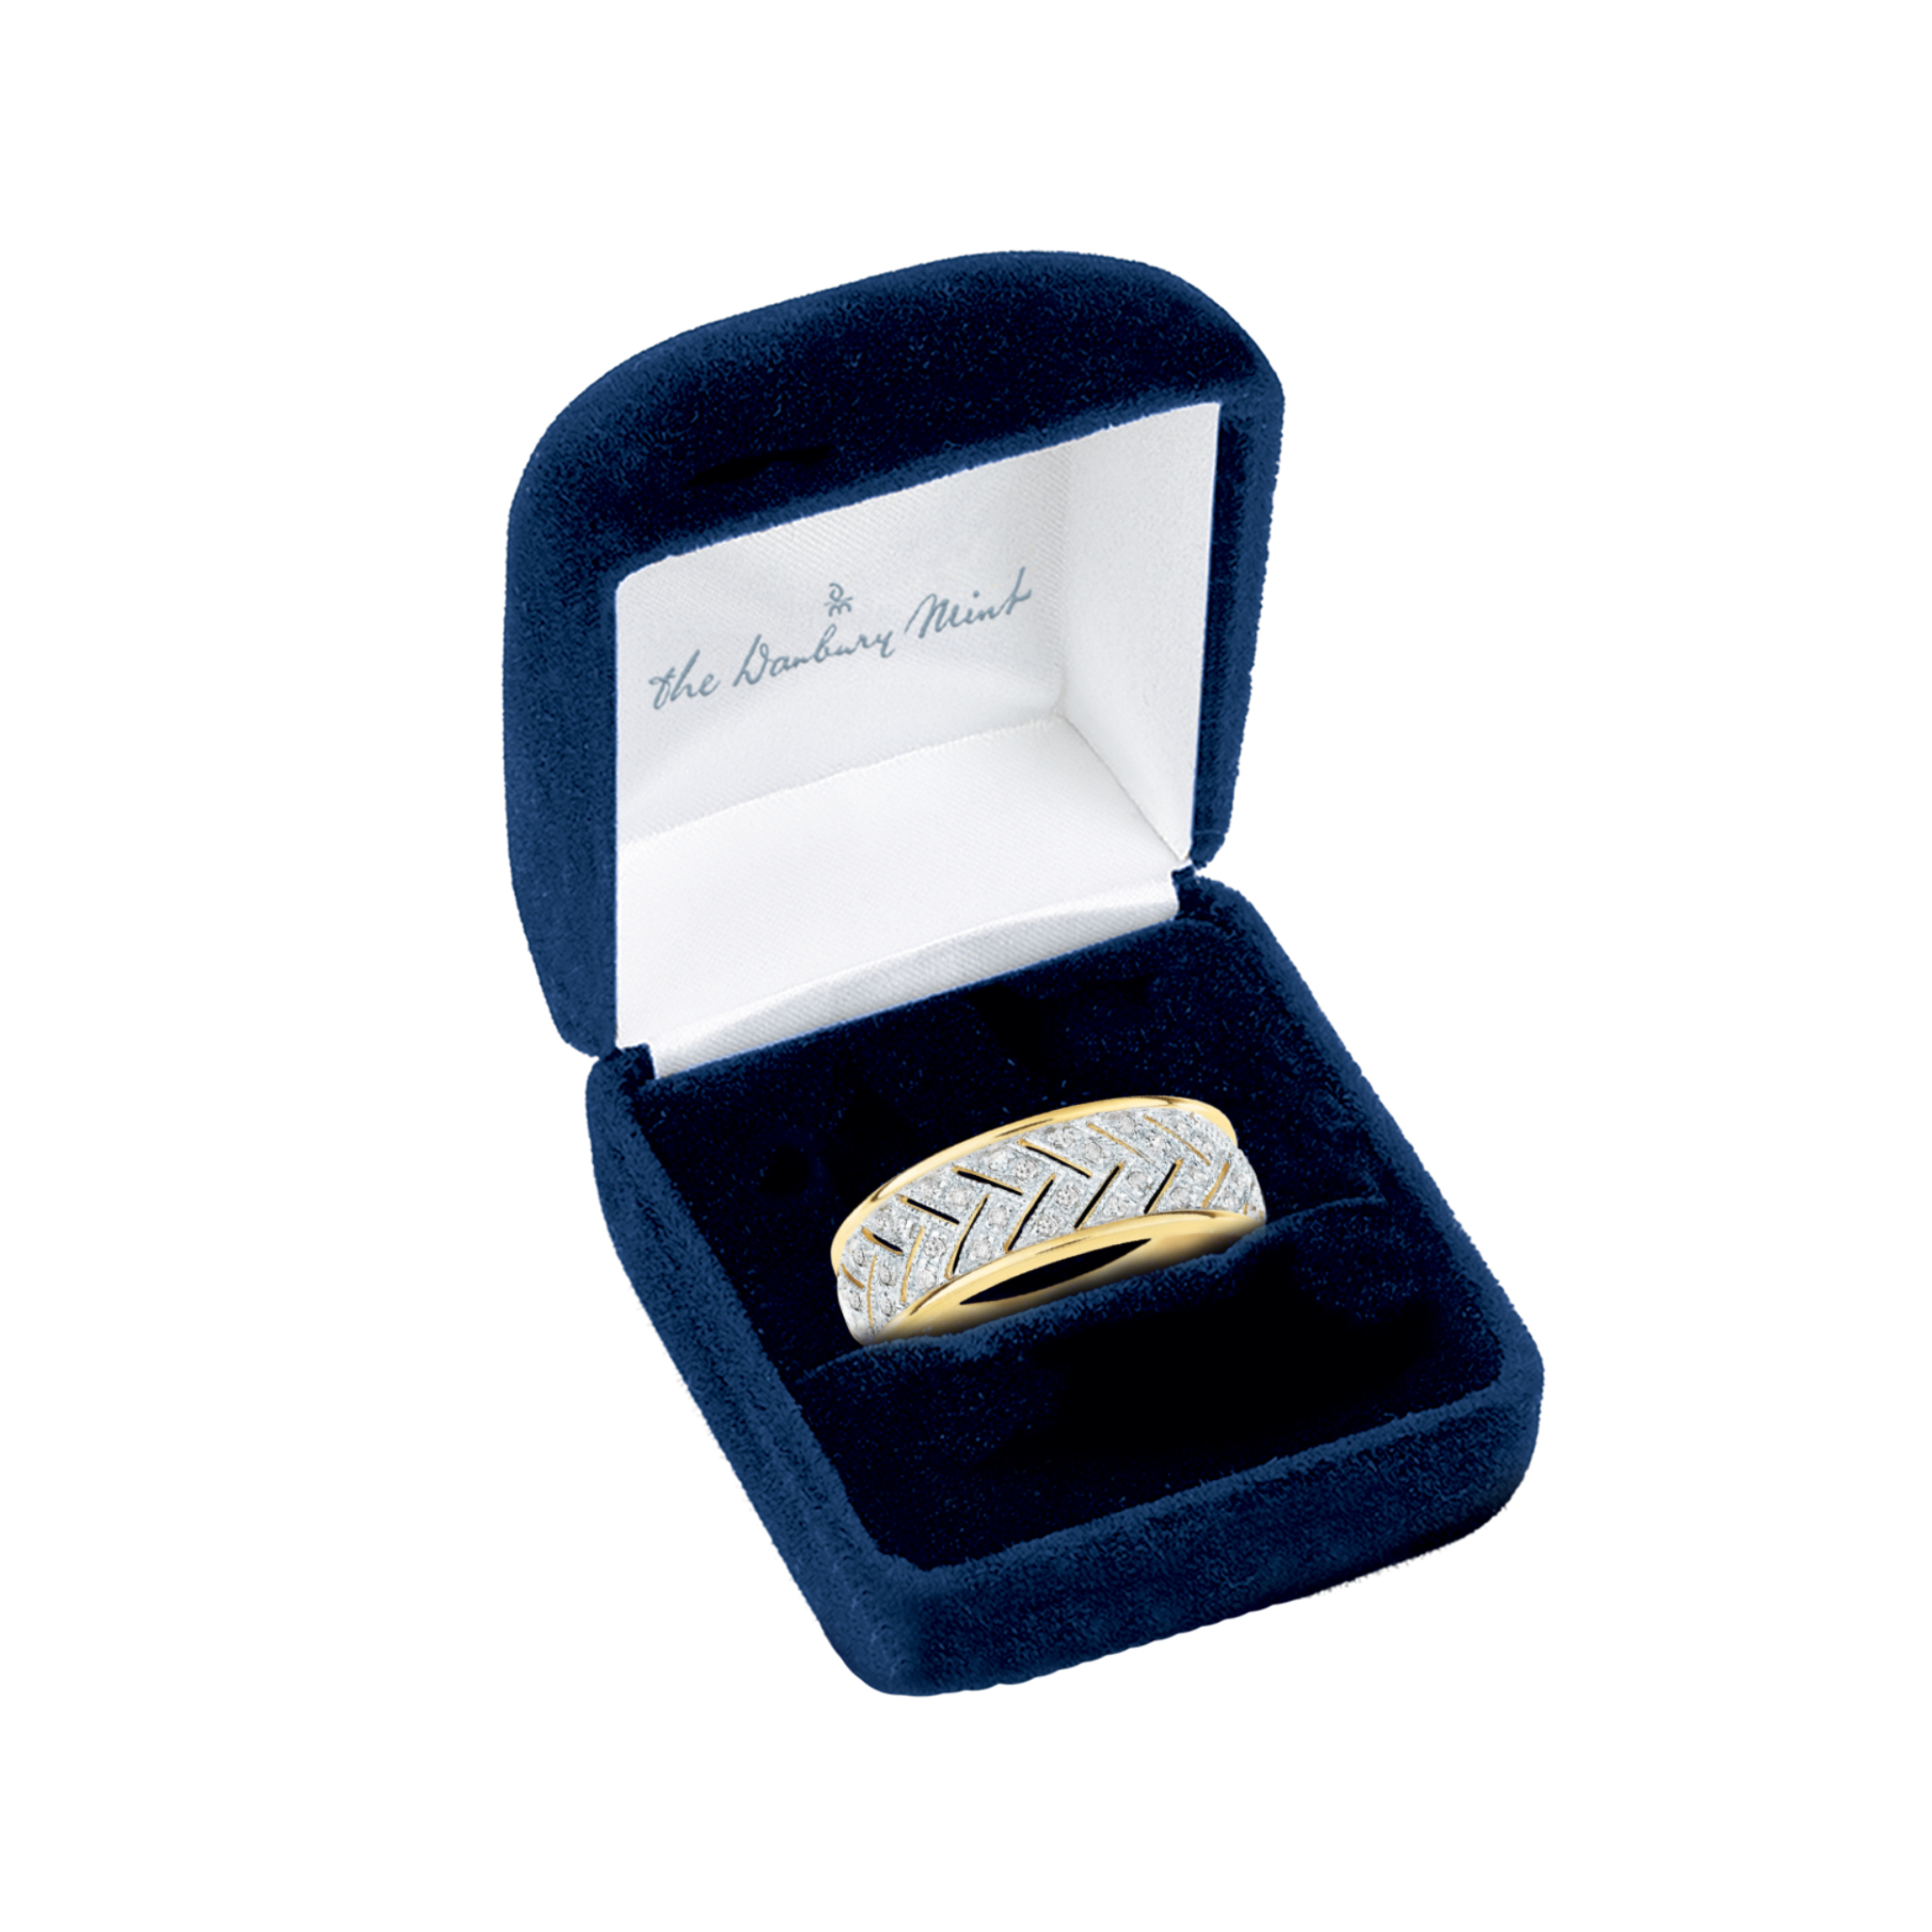 Personalized Diamond Fire Ring 10892 0018 a main